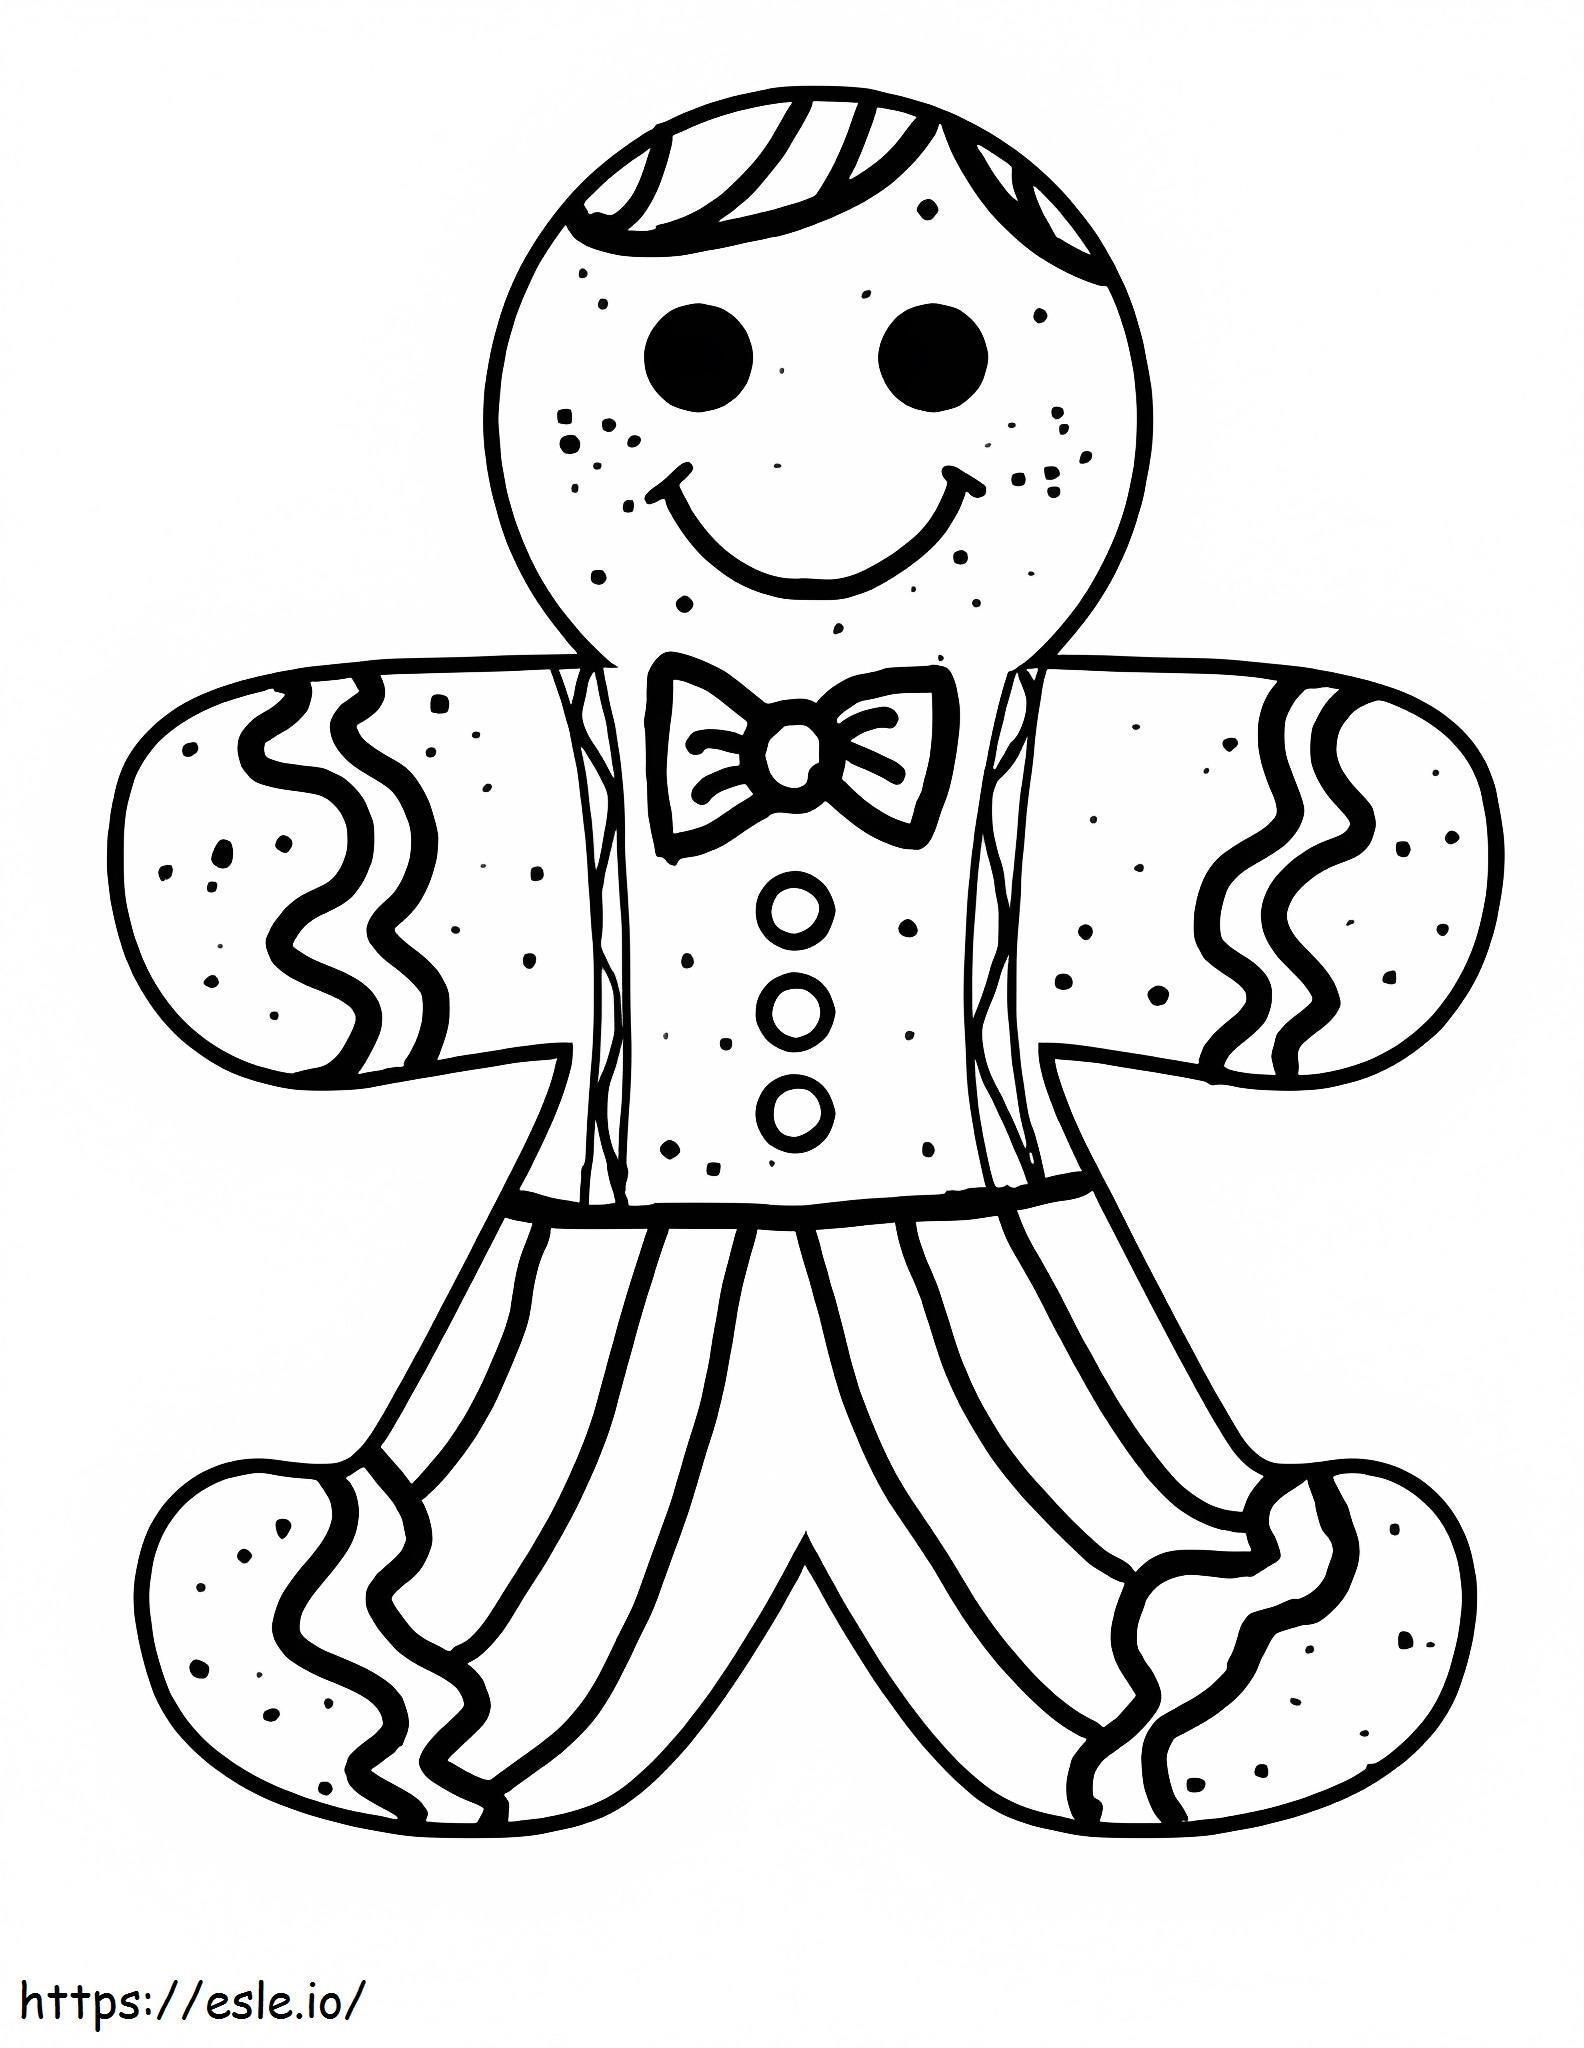 The Gingerbread Men coloring page